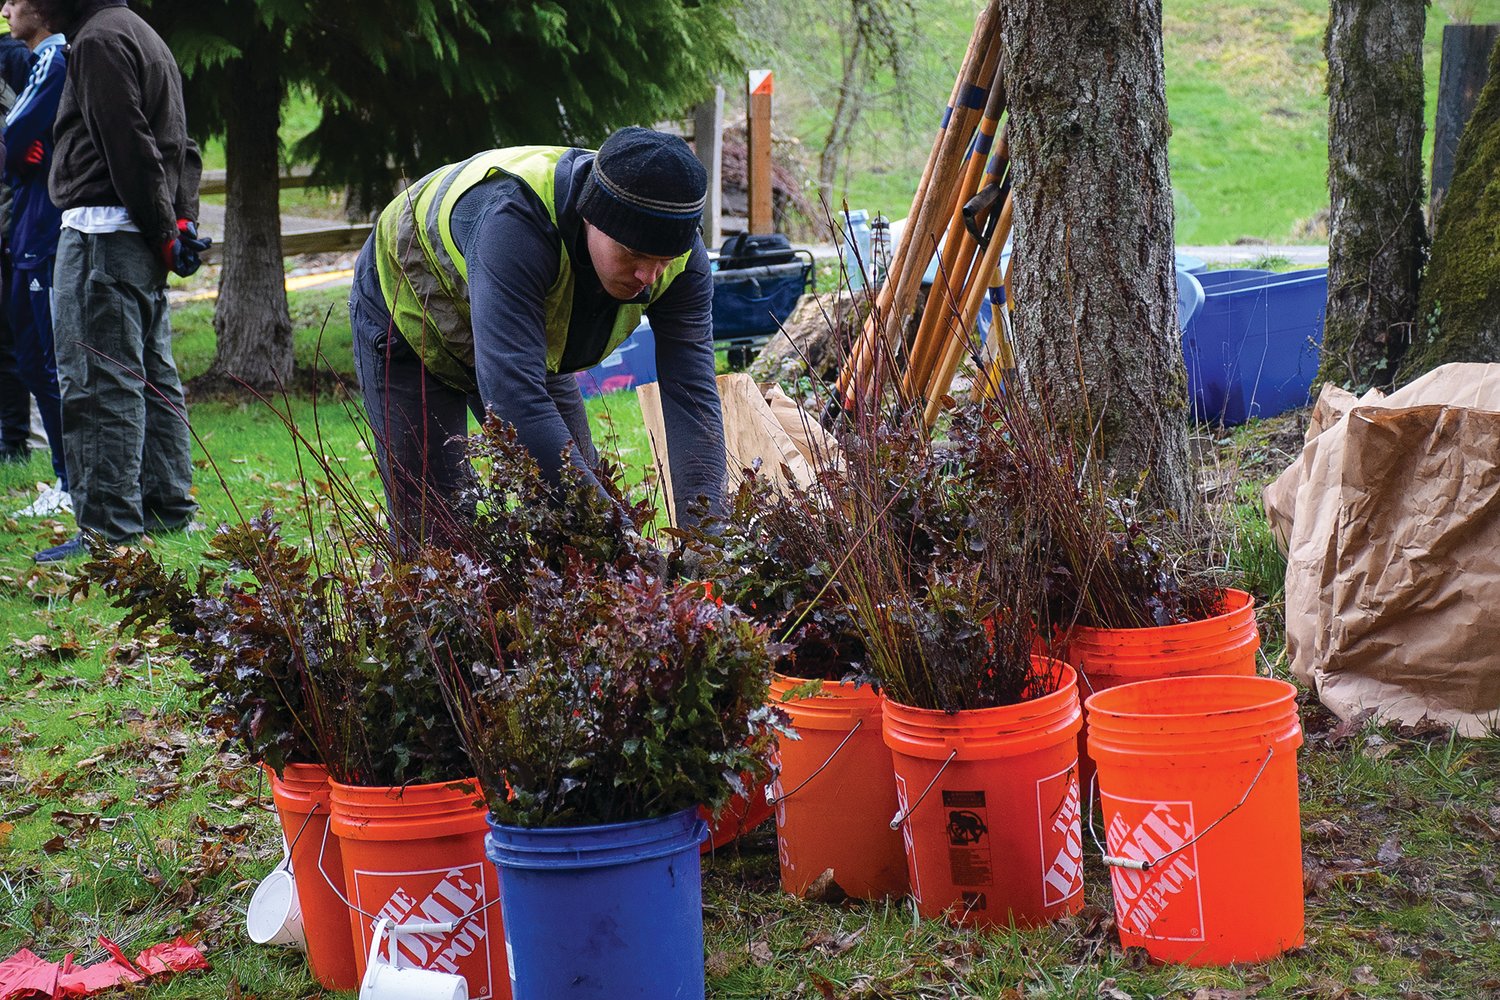 Daniel Pauls, with environmental consultant Green Banks, prepares shrubs and trees so they can be planted along the bank of Gee Creek at Abrams Park in Ridgefield on Feb. 17.